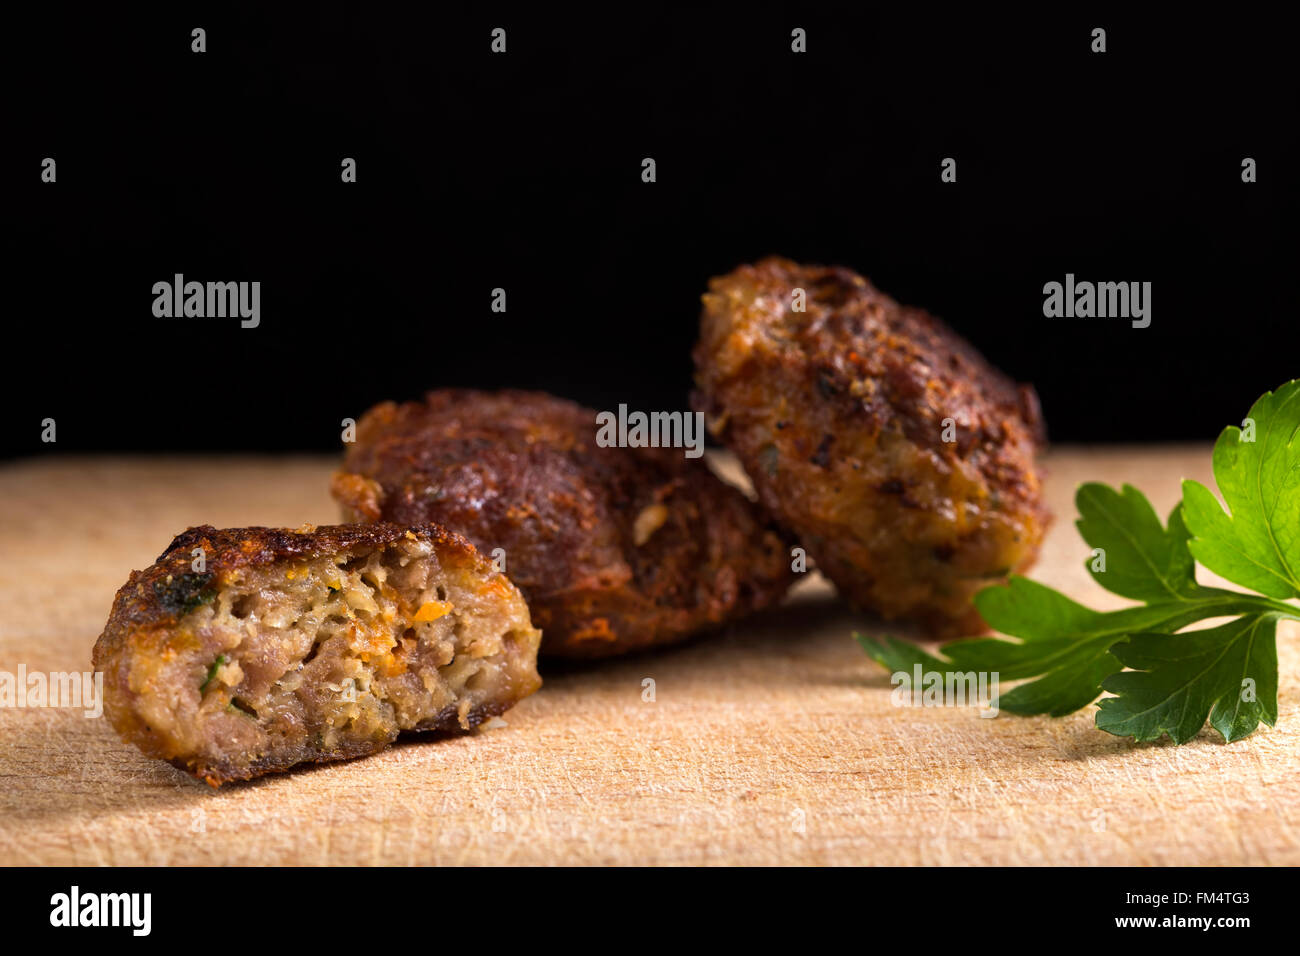 Romanian meatballs called 'chiftele' made with minced meat and parsley Stock Photo